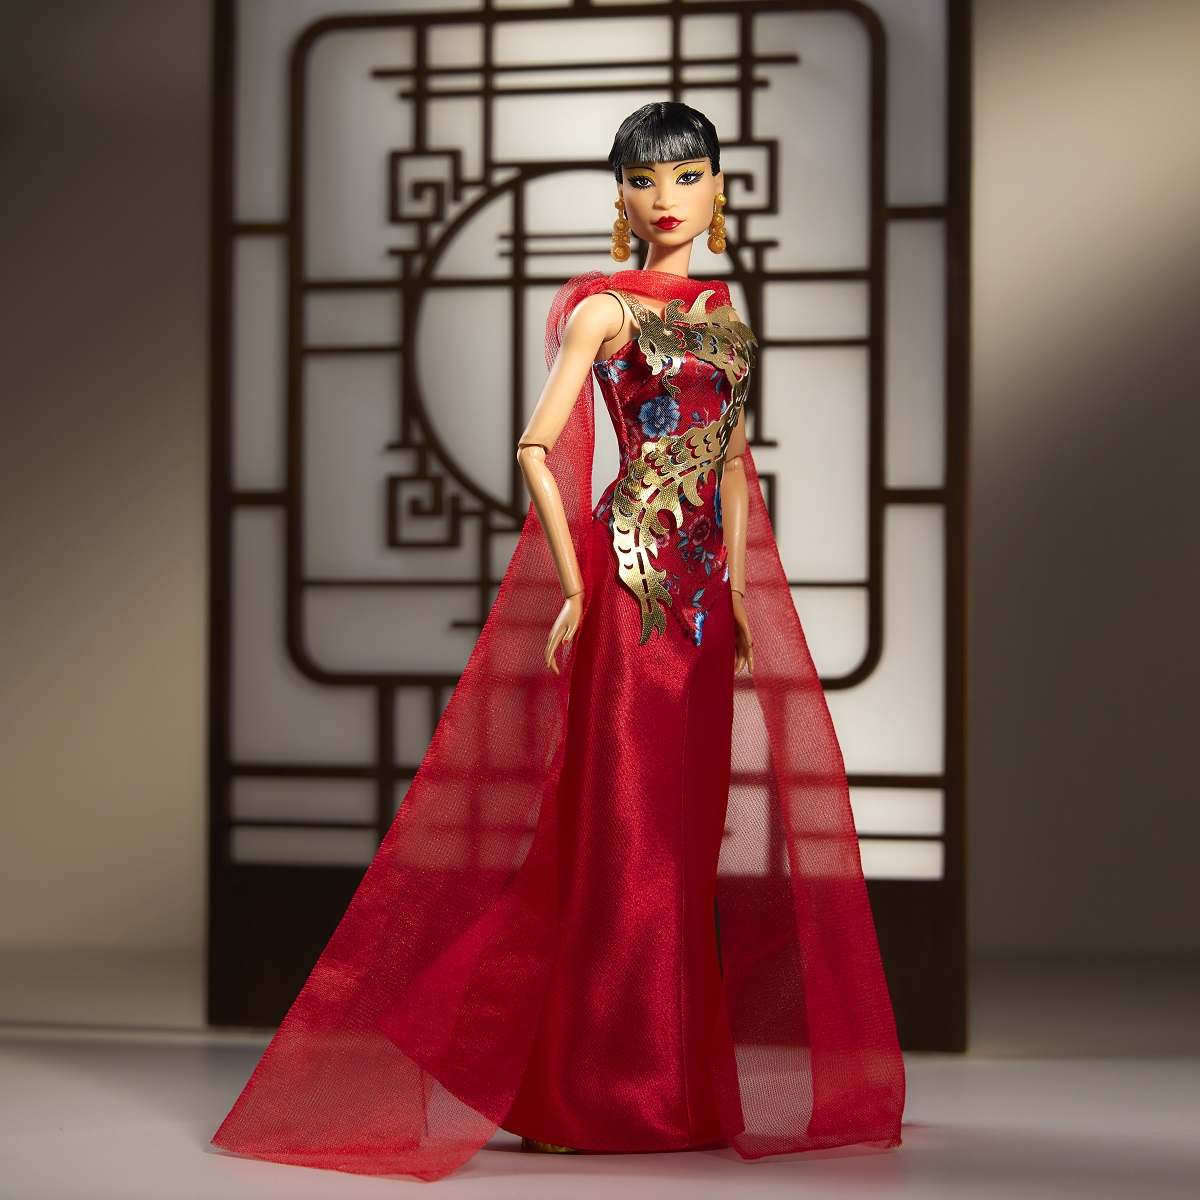 Barbie Unveils May Wong Doll for AAPI Heritage Month - Japan News